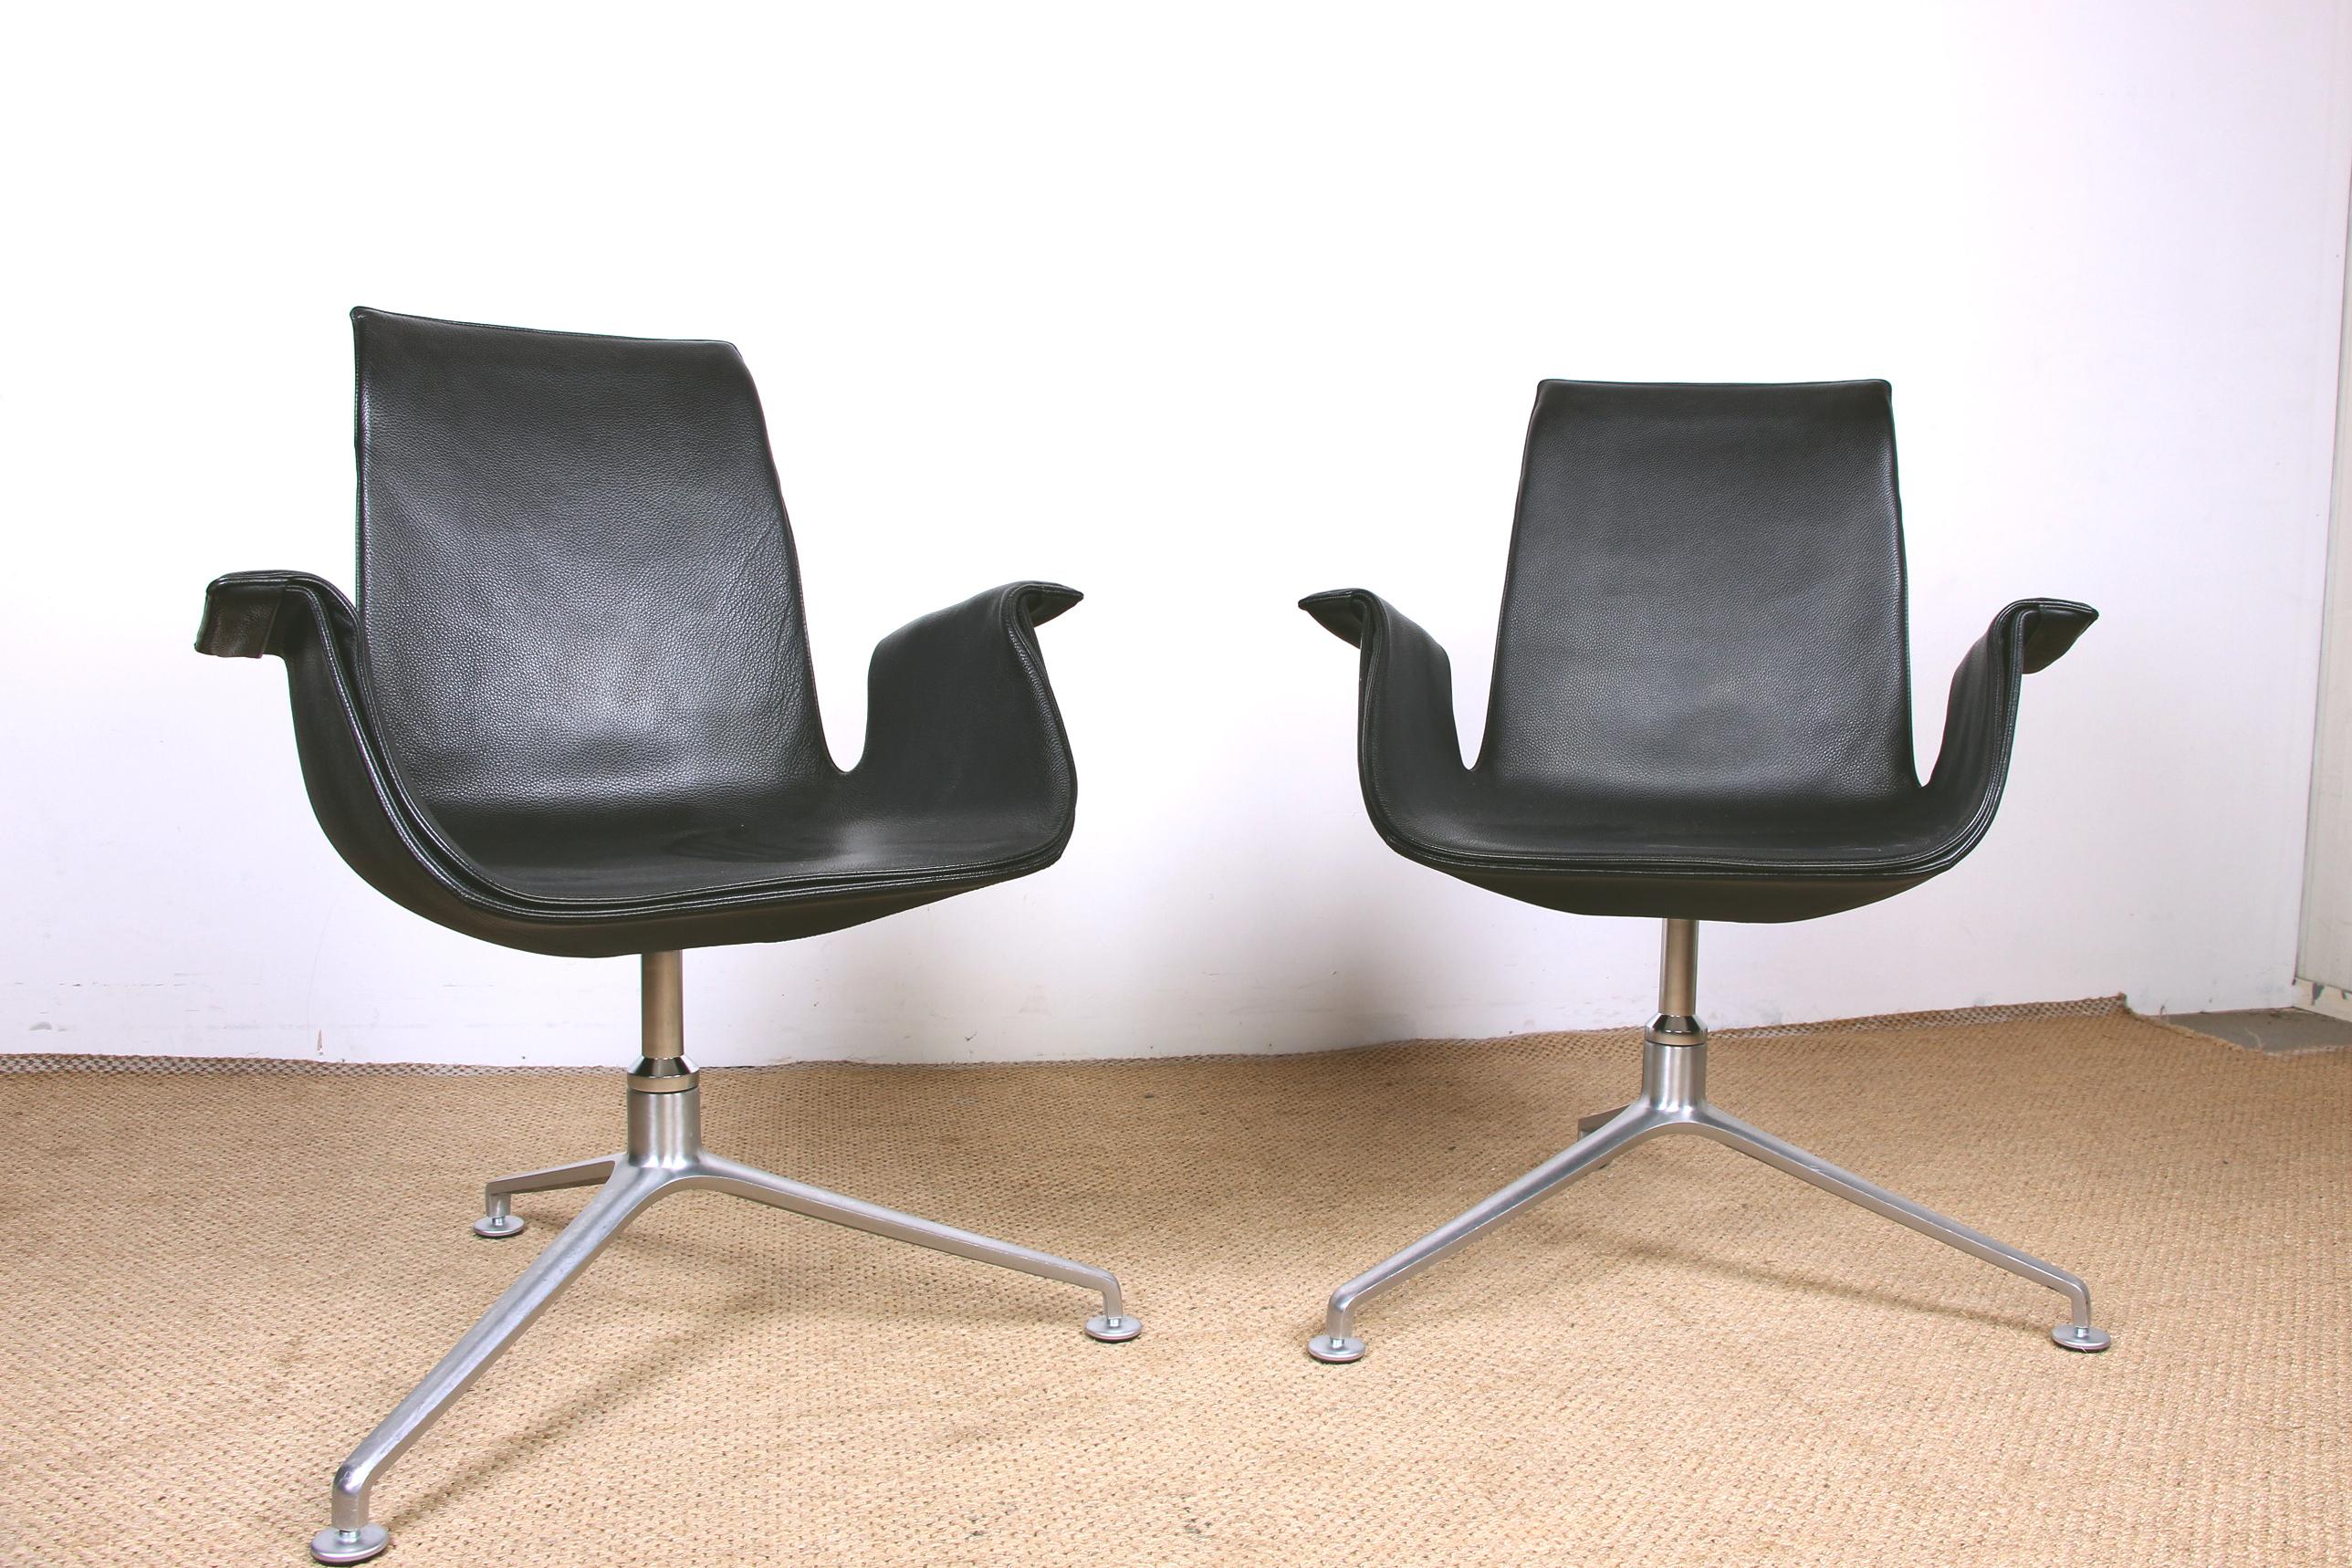 Scandinavian Modern 2 Danish deskchairs, Leather and steel, “Tulip chair” by Fabricius & Kalsthom. For Sale